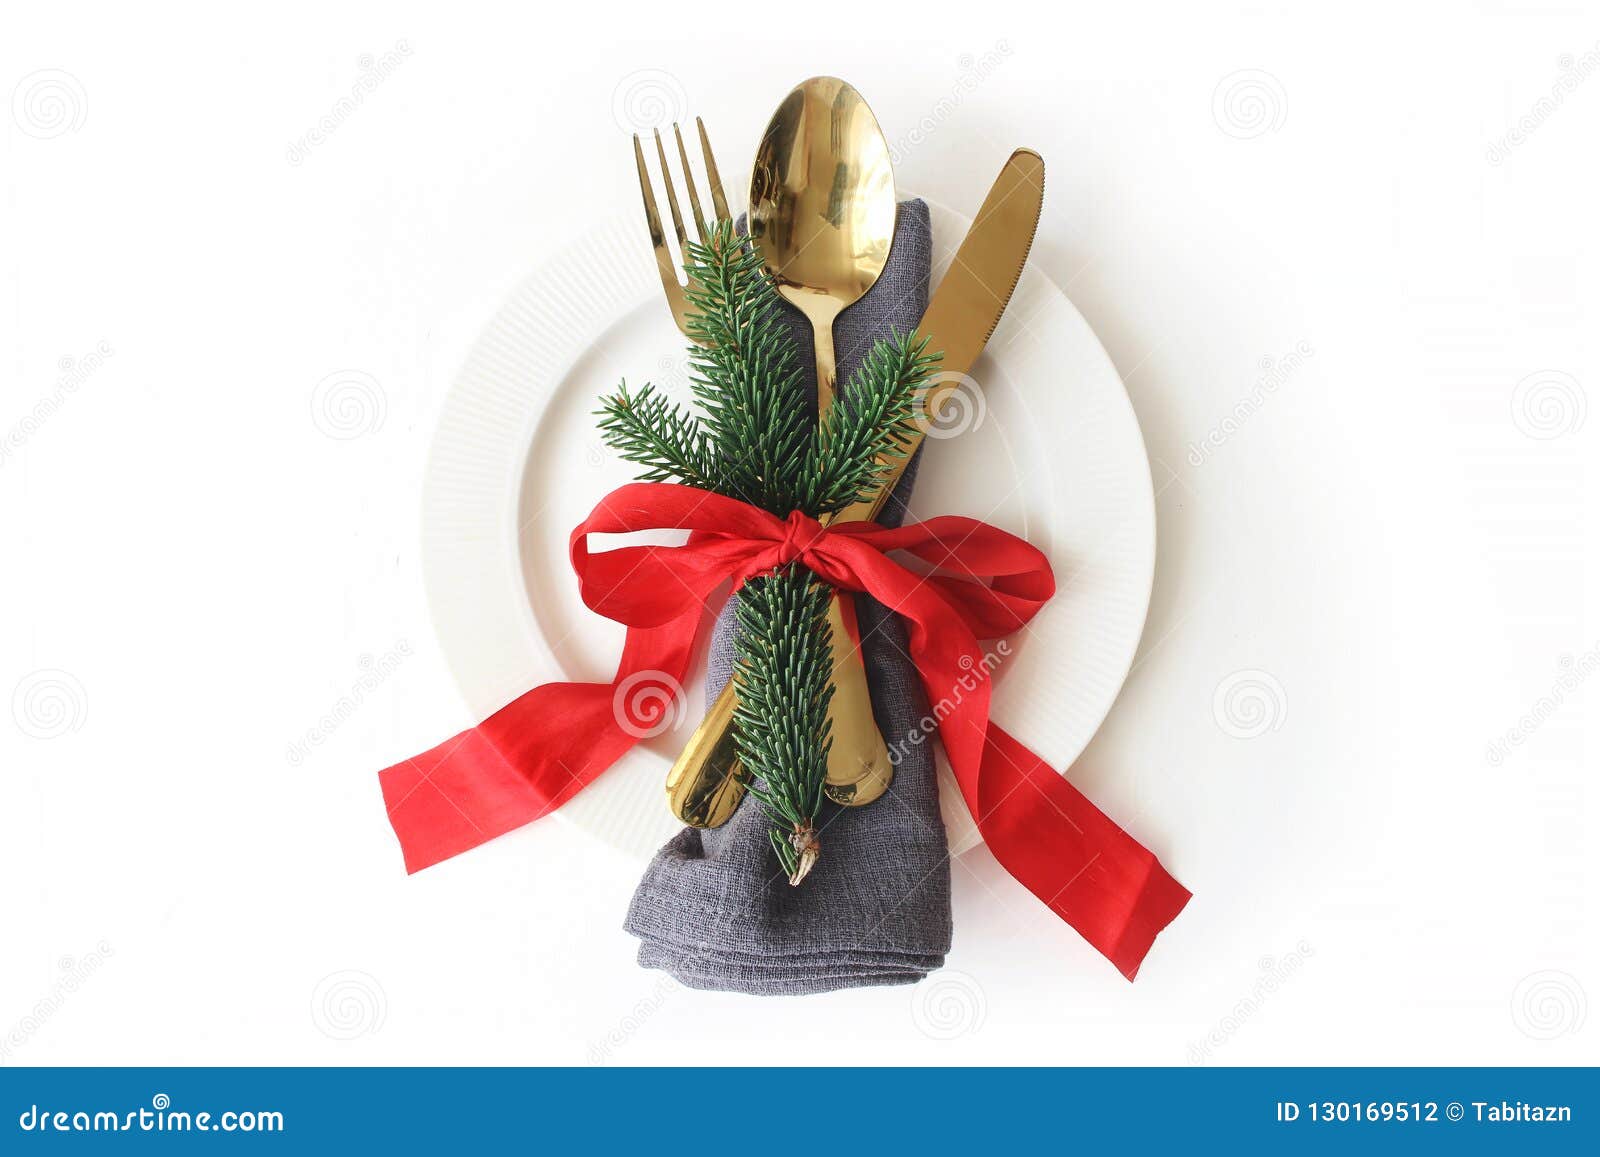 traditional christmas table place setting. golden cutlery, linen napkin, green spruce branches, plate and red ribbon